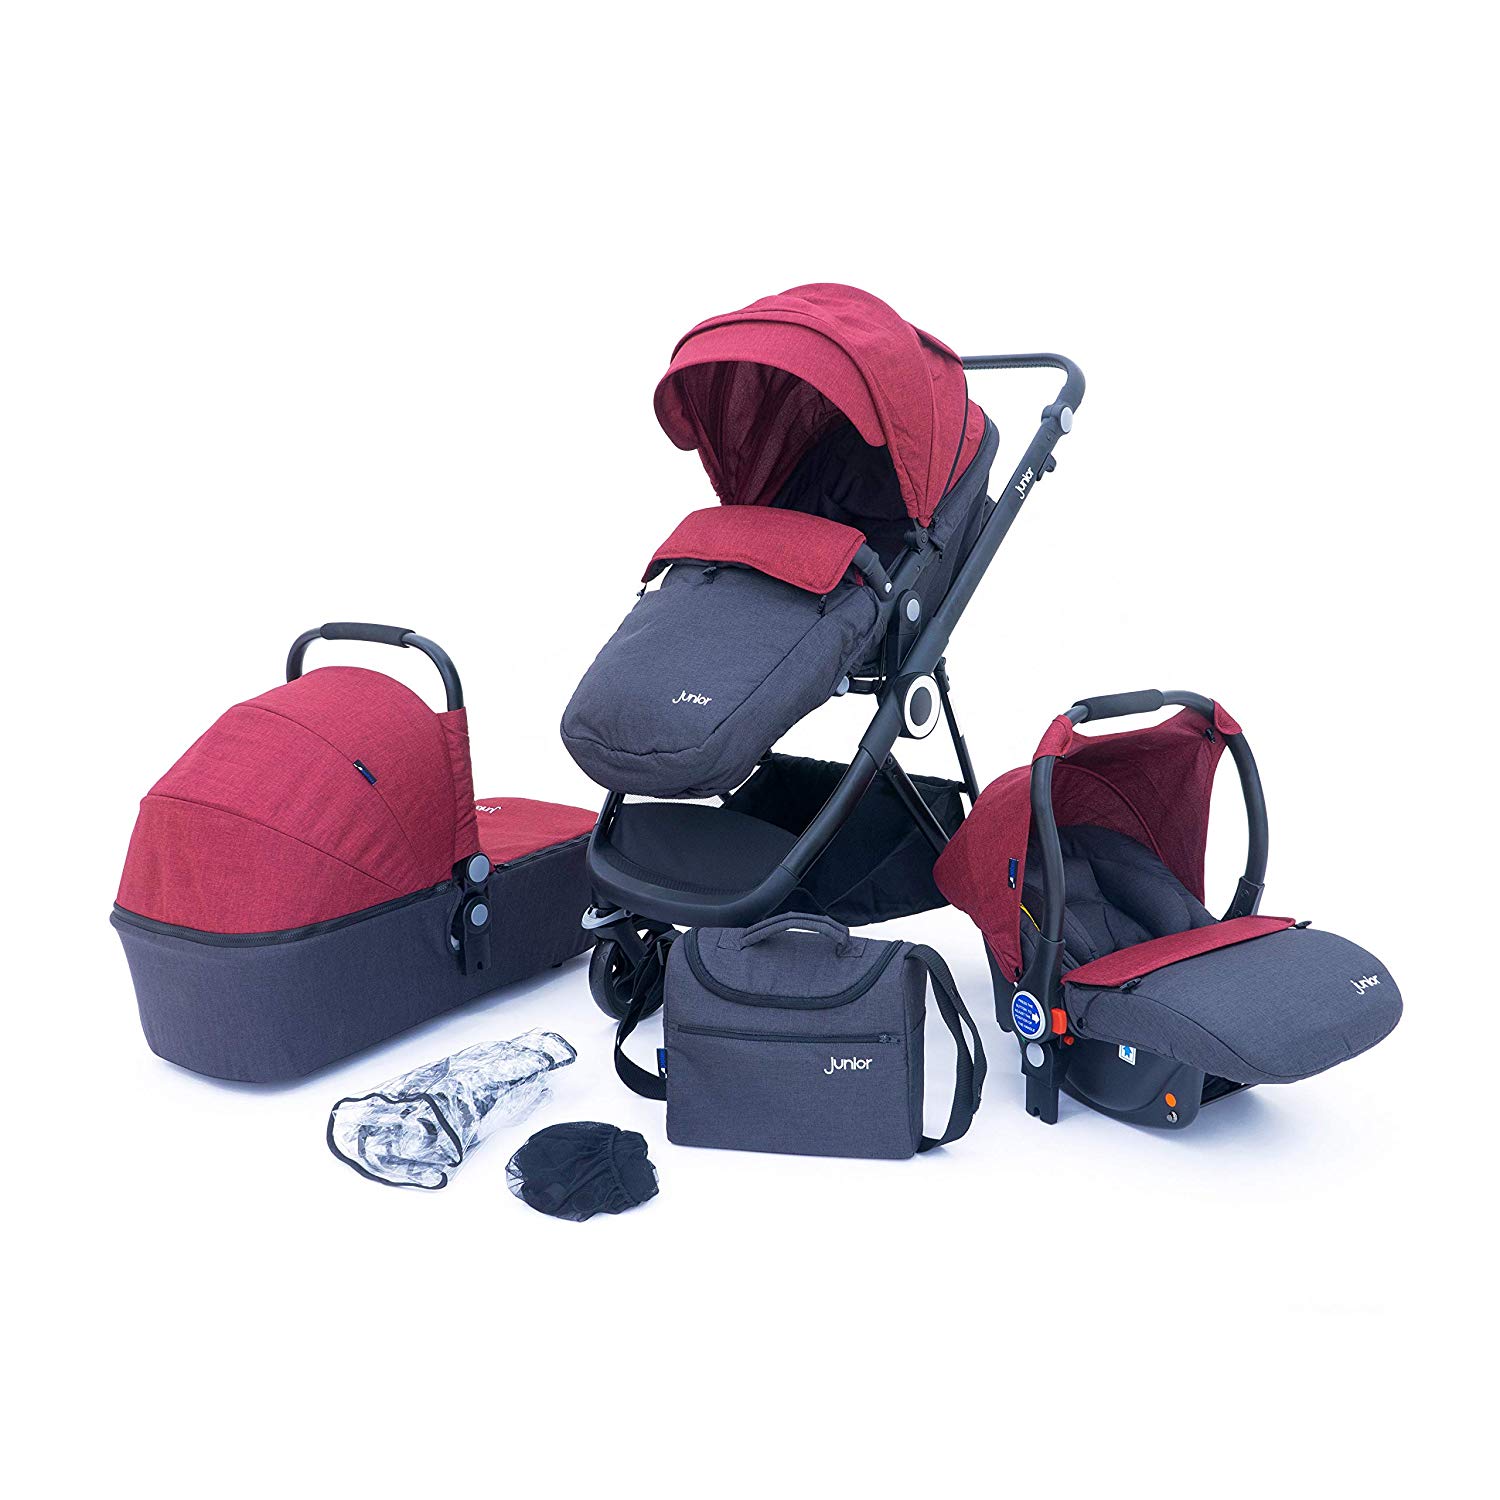 PETEX Multi-Traveller 3-in-1 Combination Pushchair Complete Set 10 Pieces with 3 Attachments Colour Red